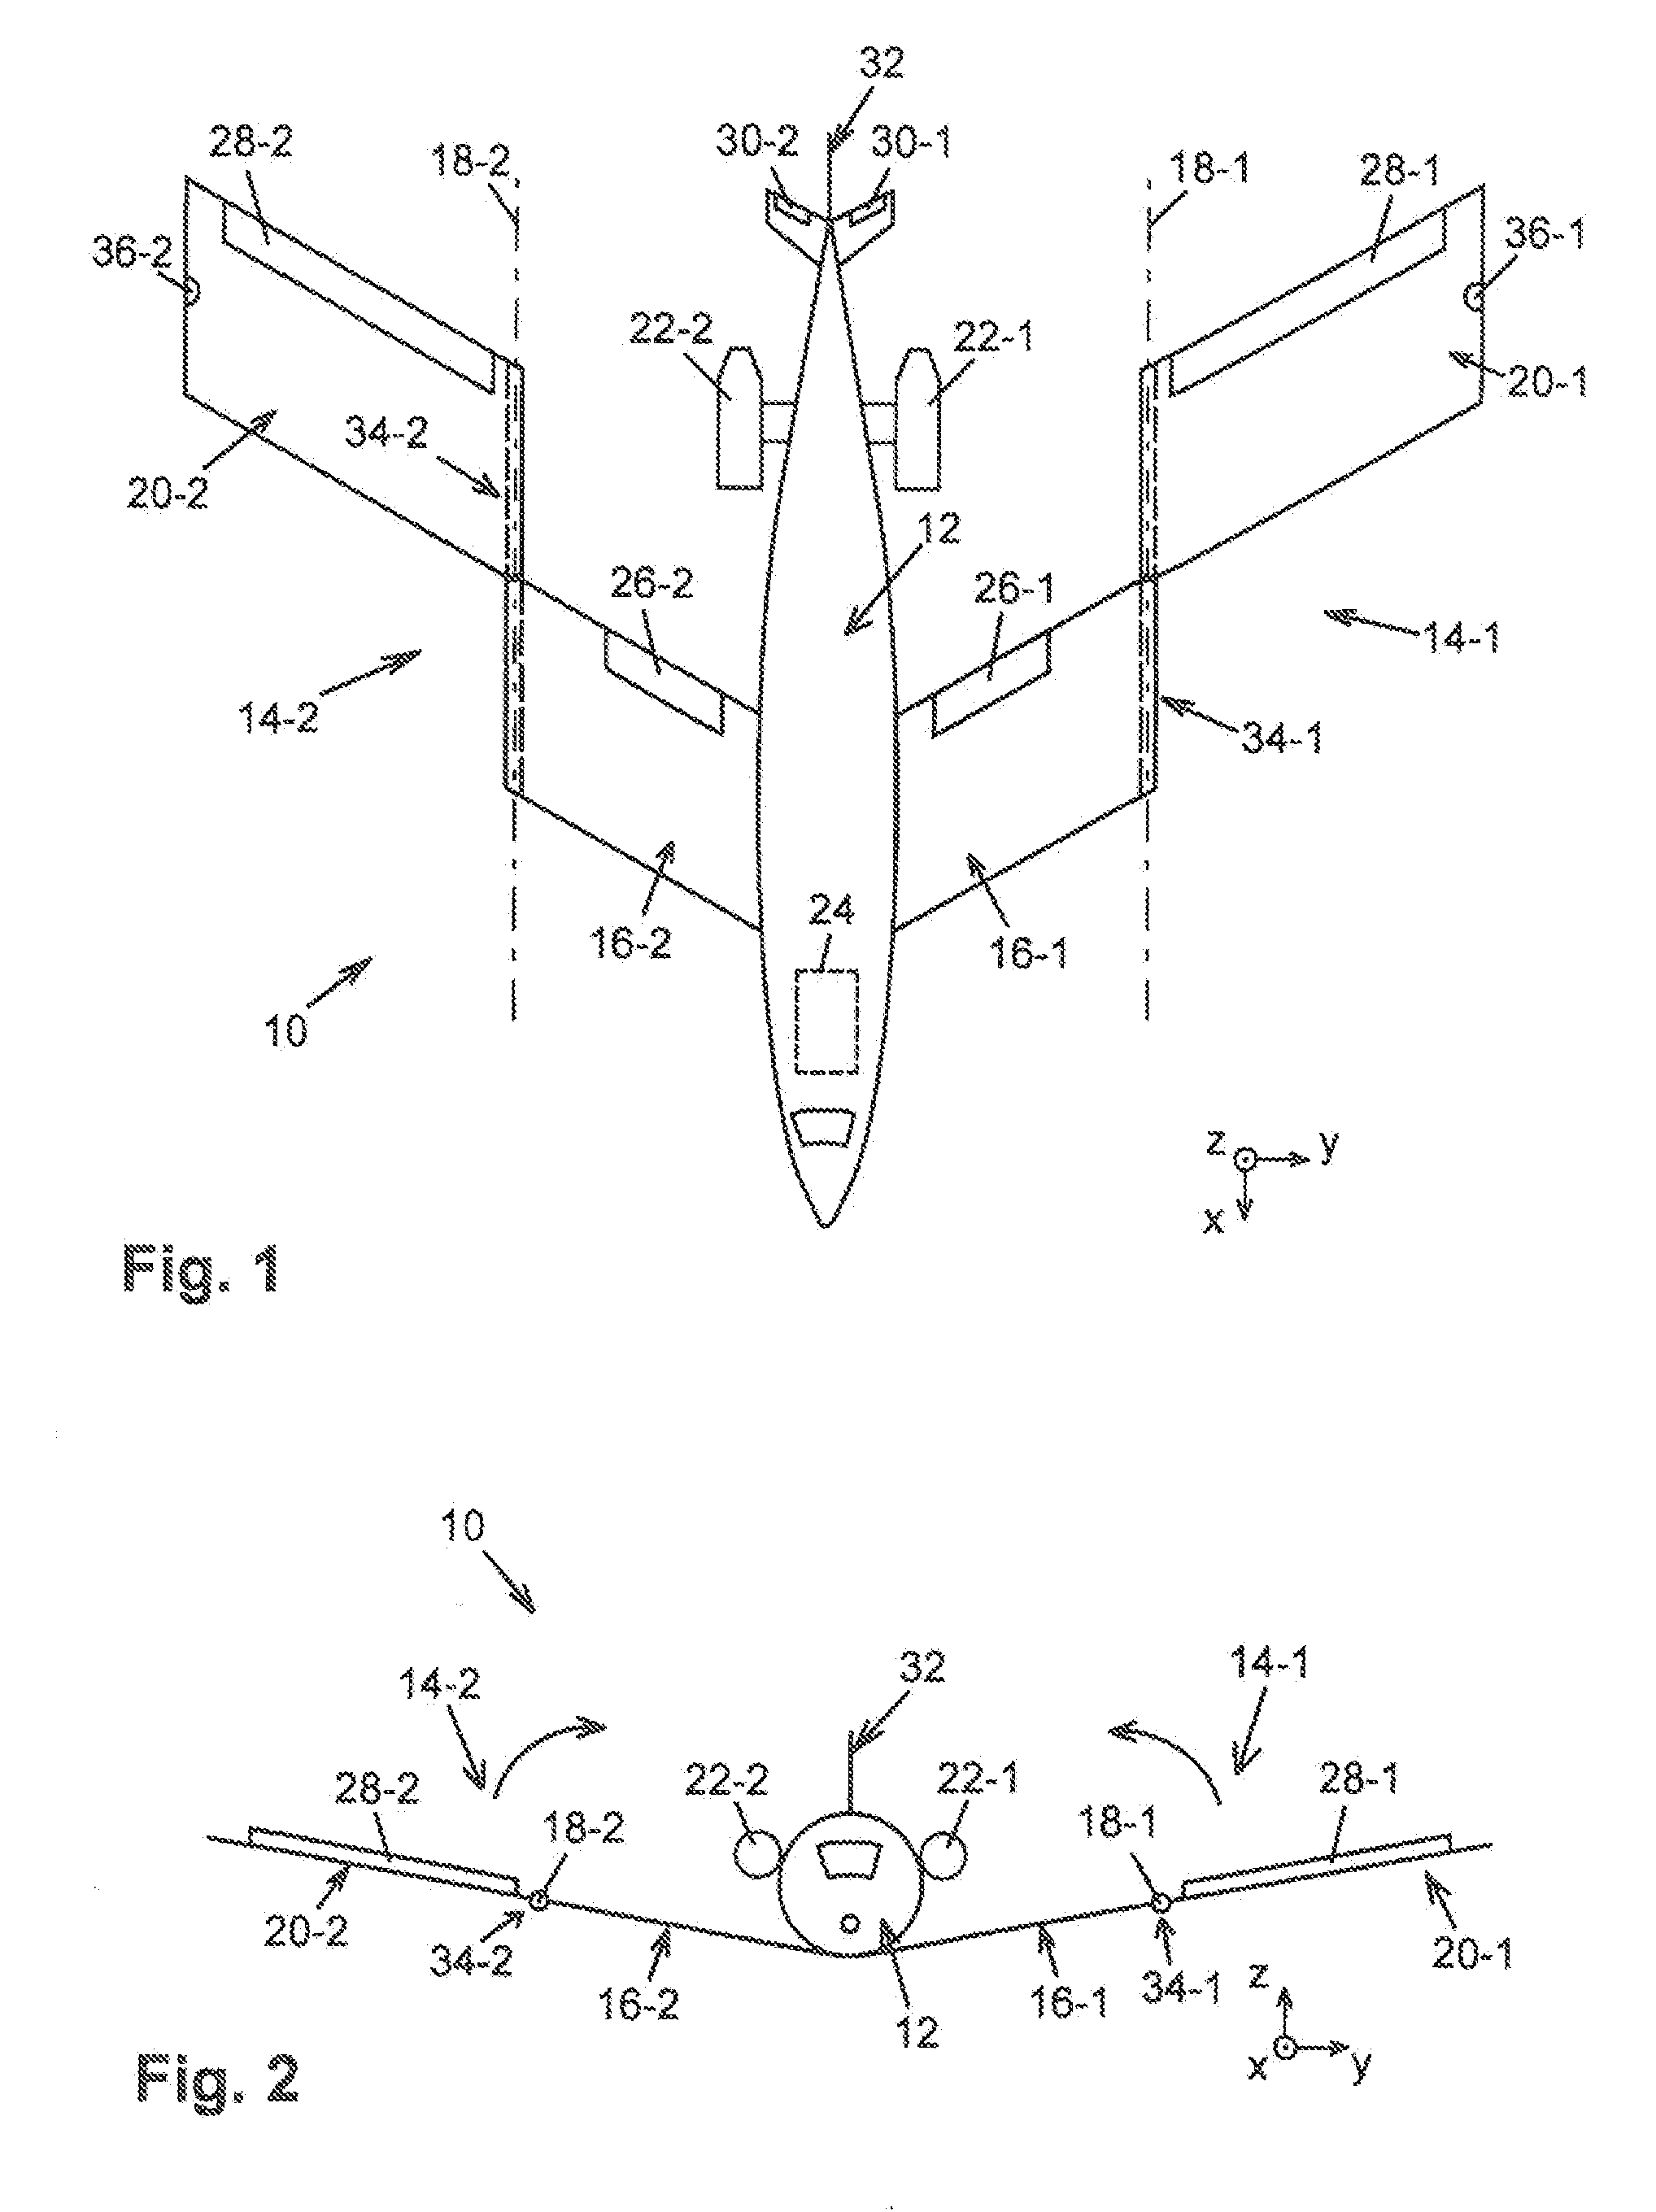 Aircraft Having a Variable Geometry